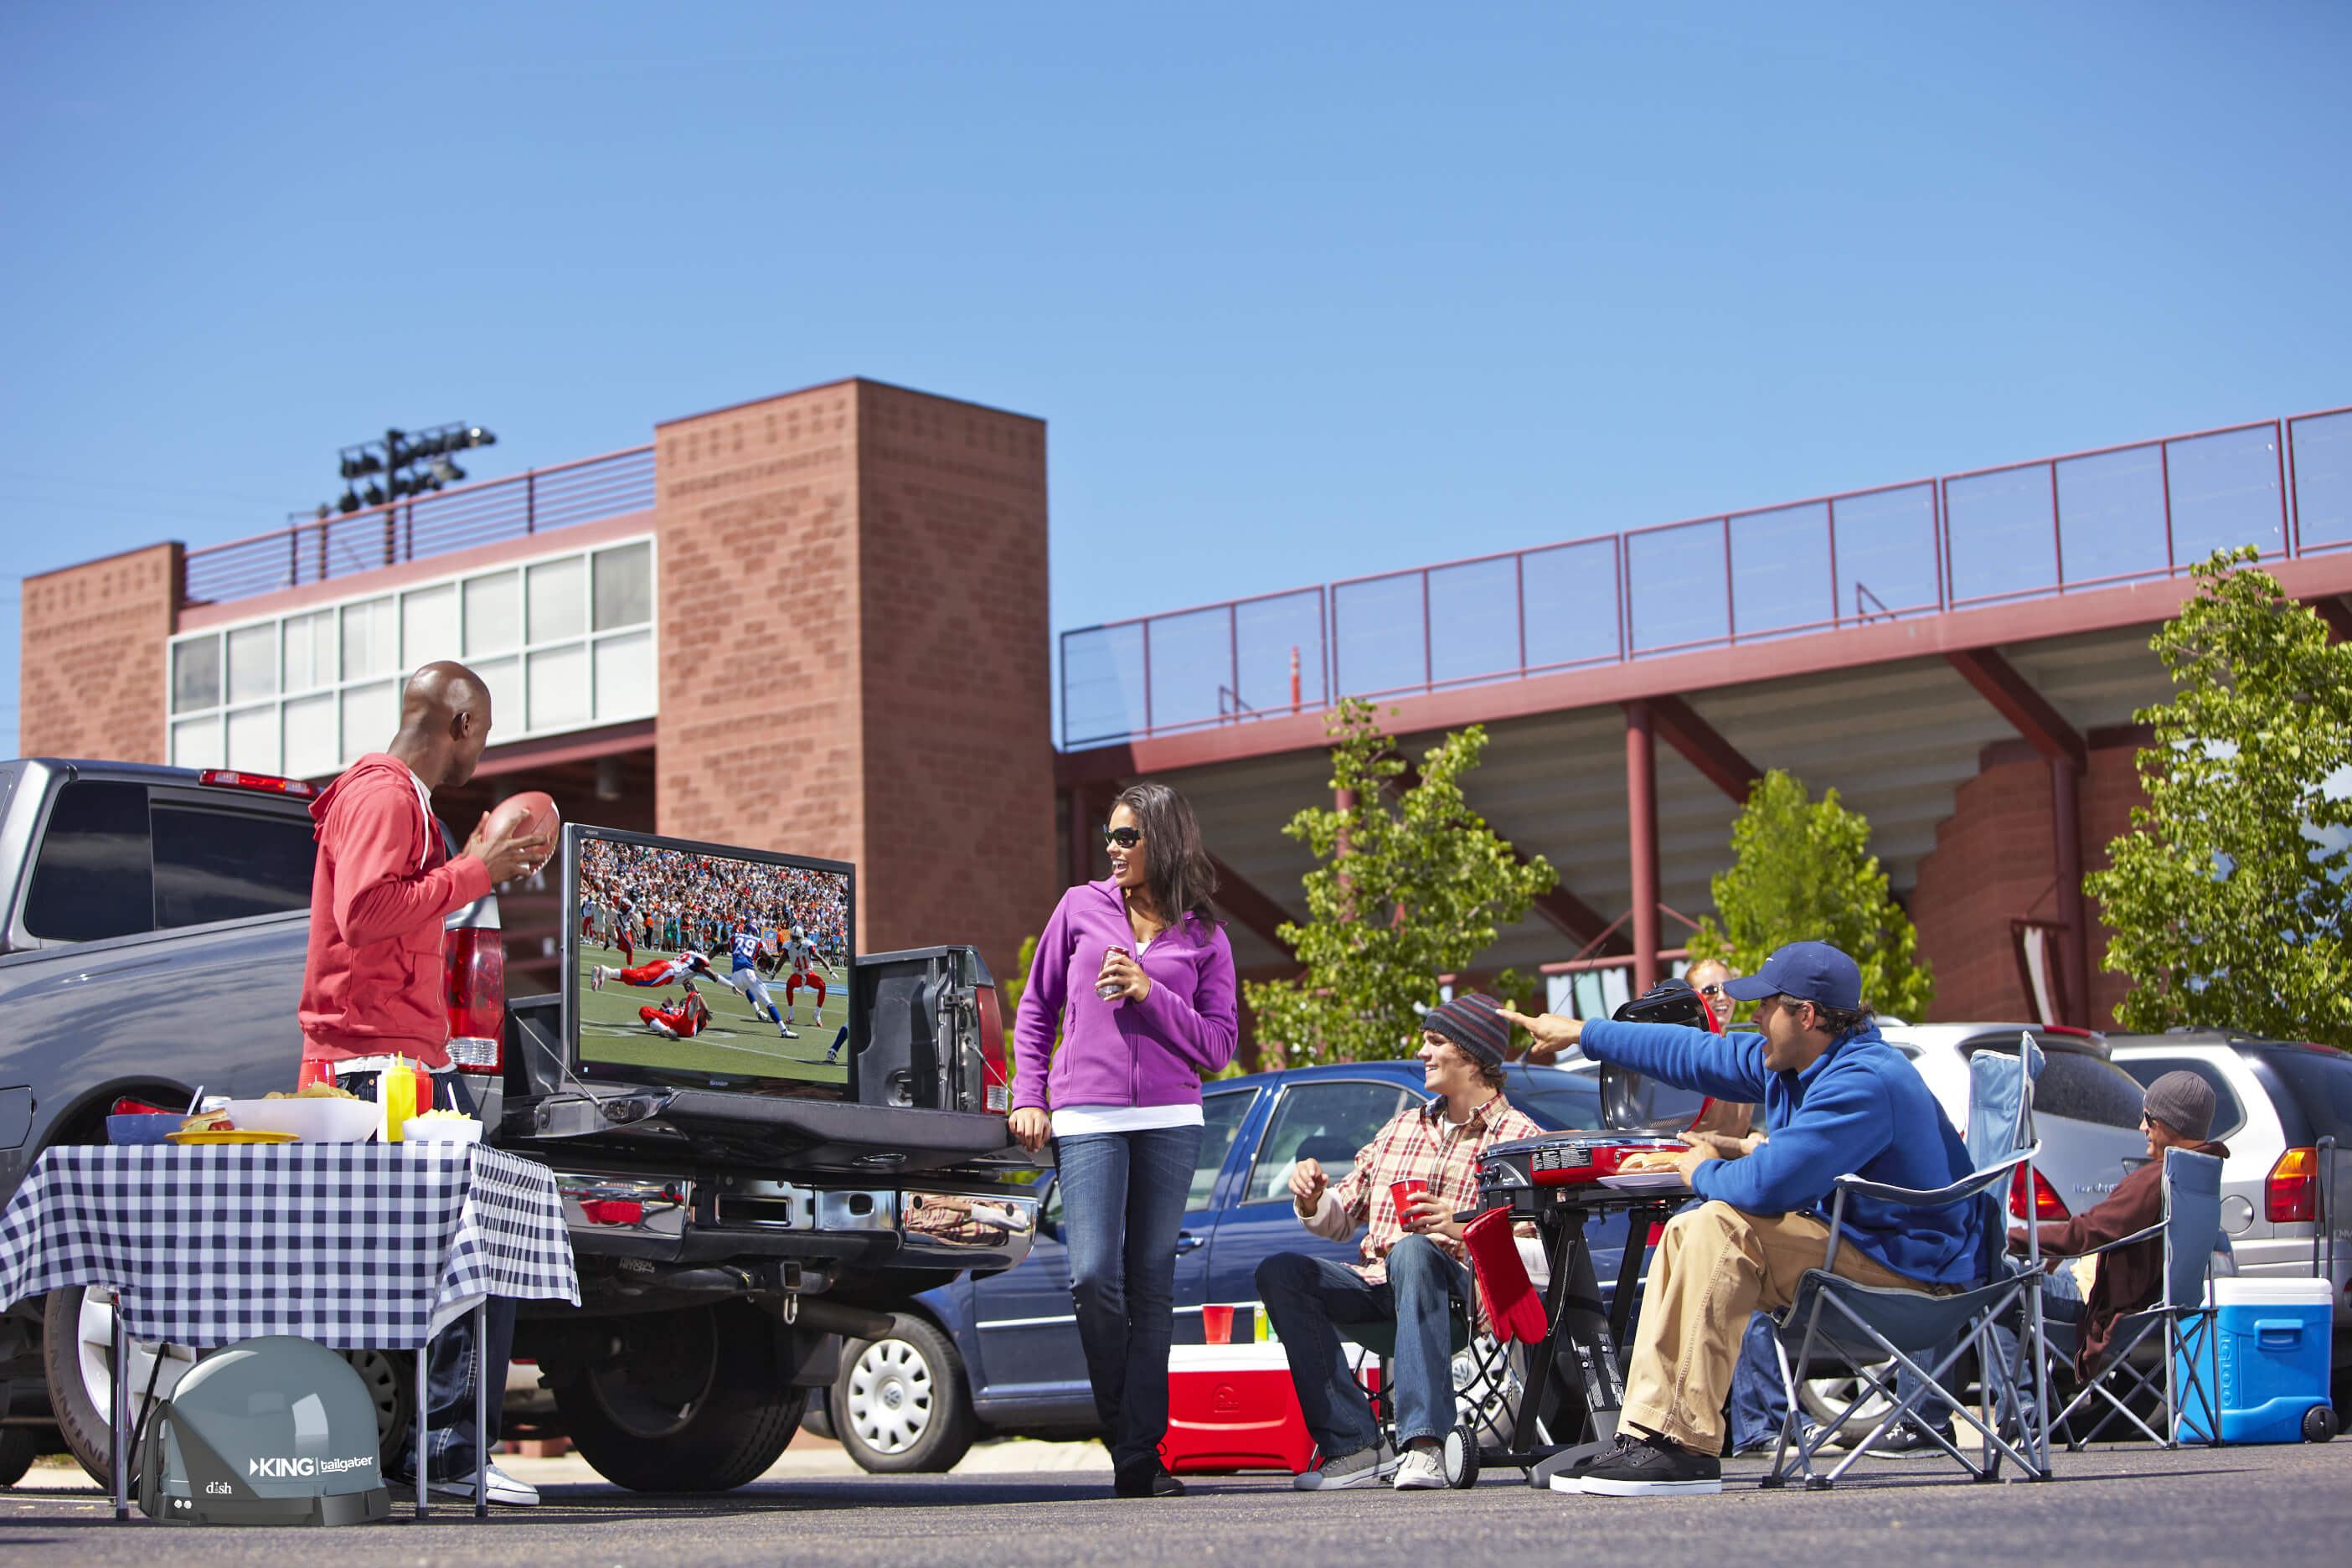 Friends tailgating outside a stadium with a TV in a truck bed